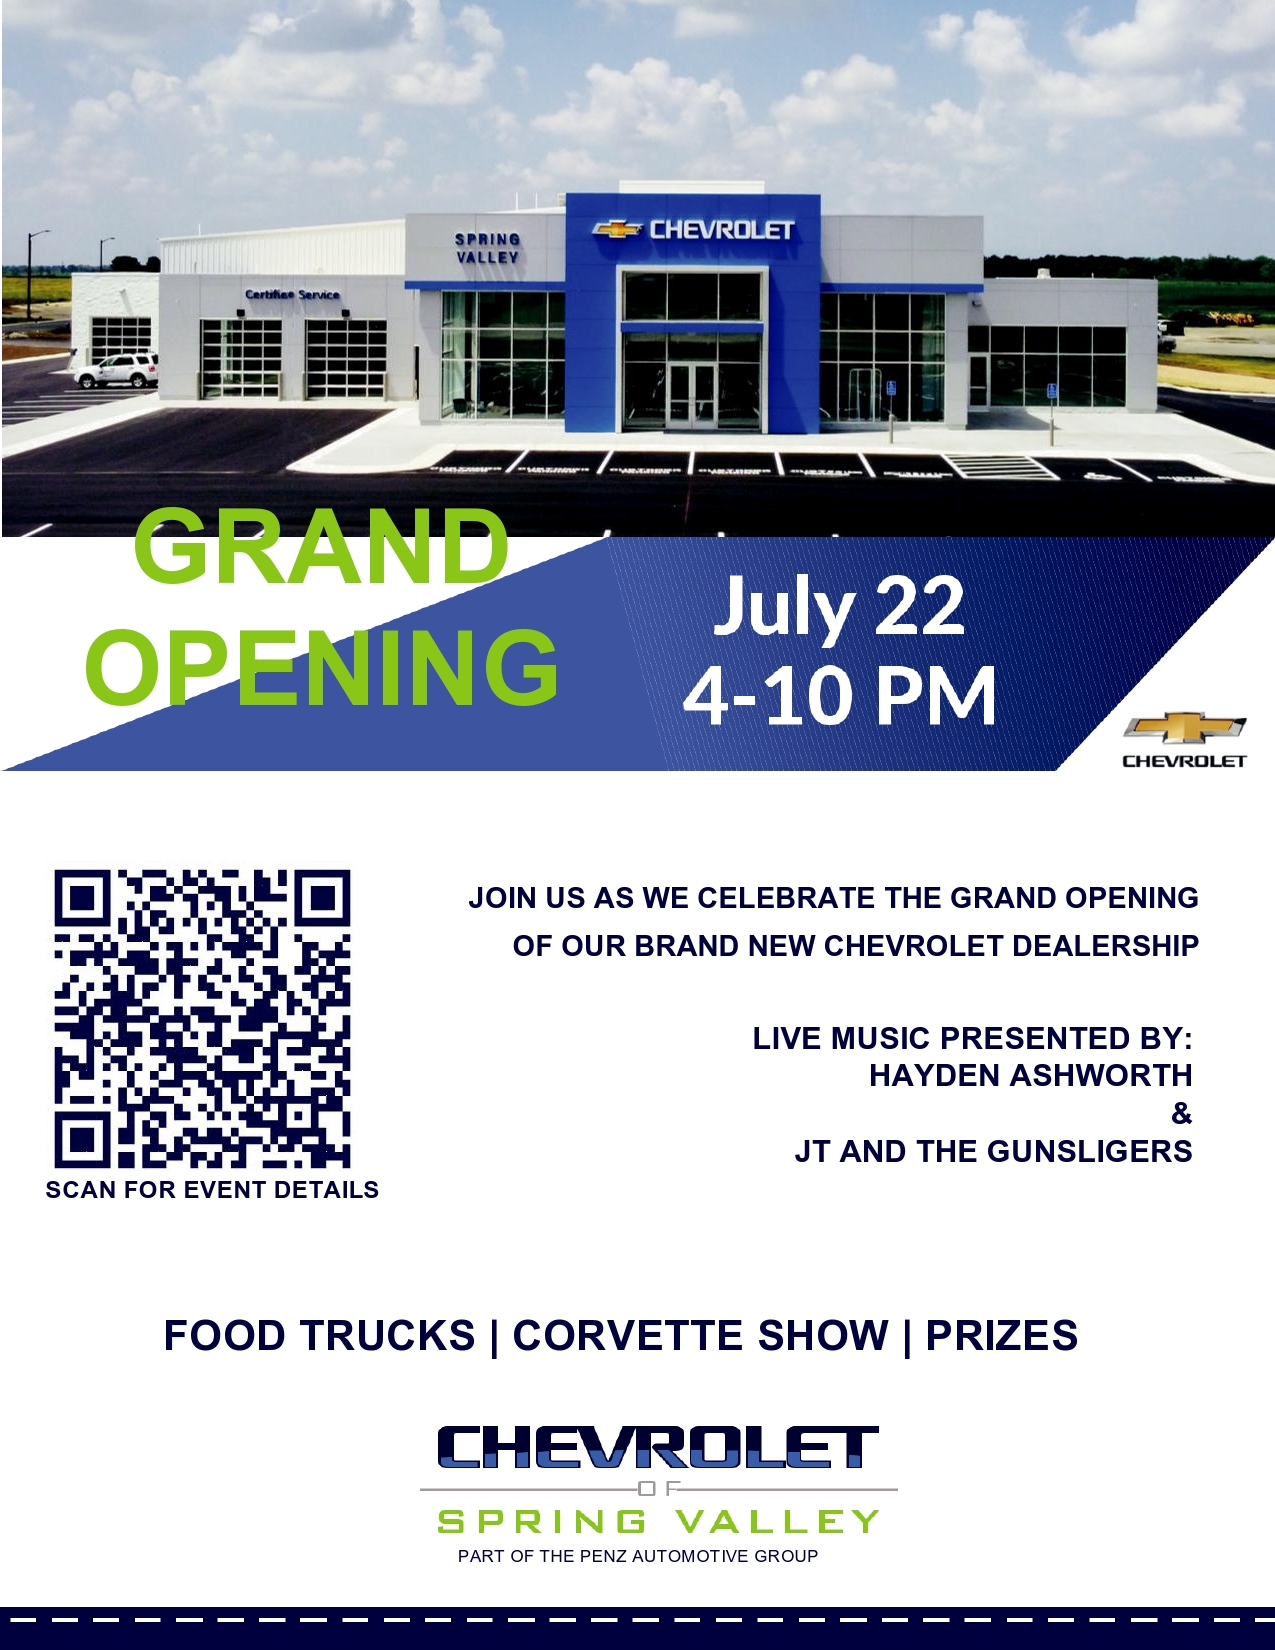 Free grand opening flyer 22